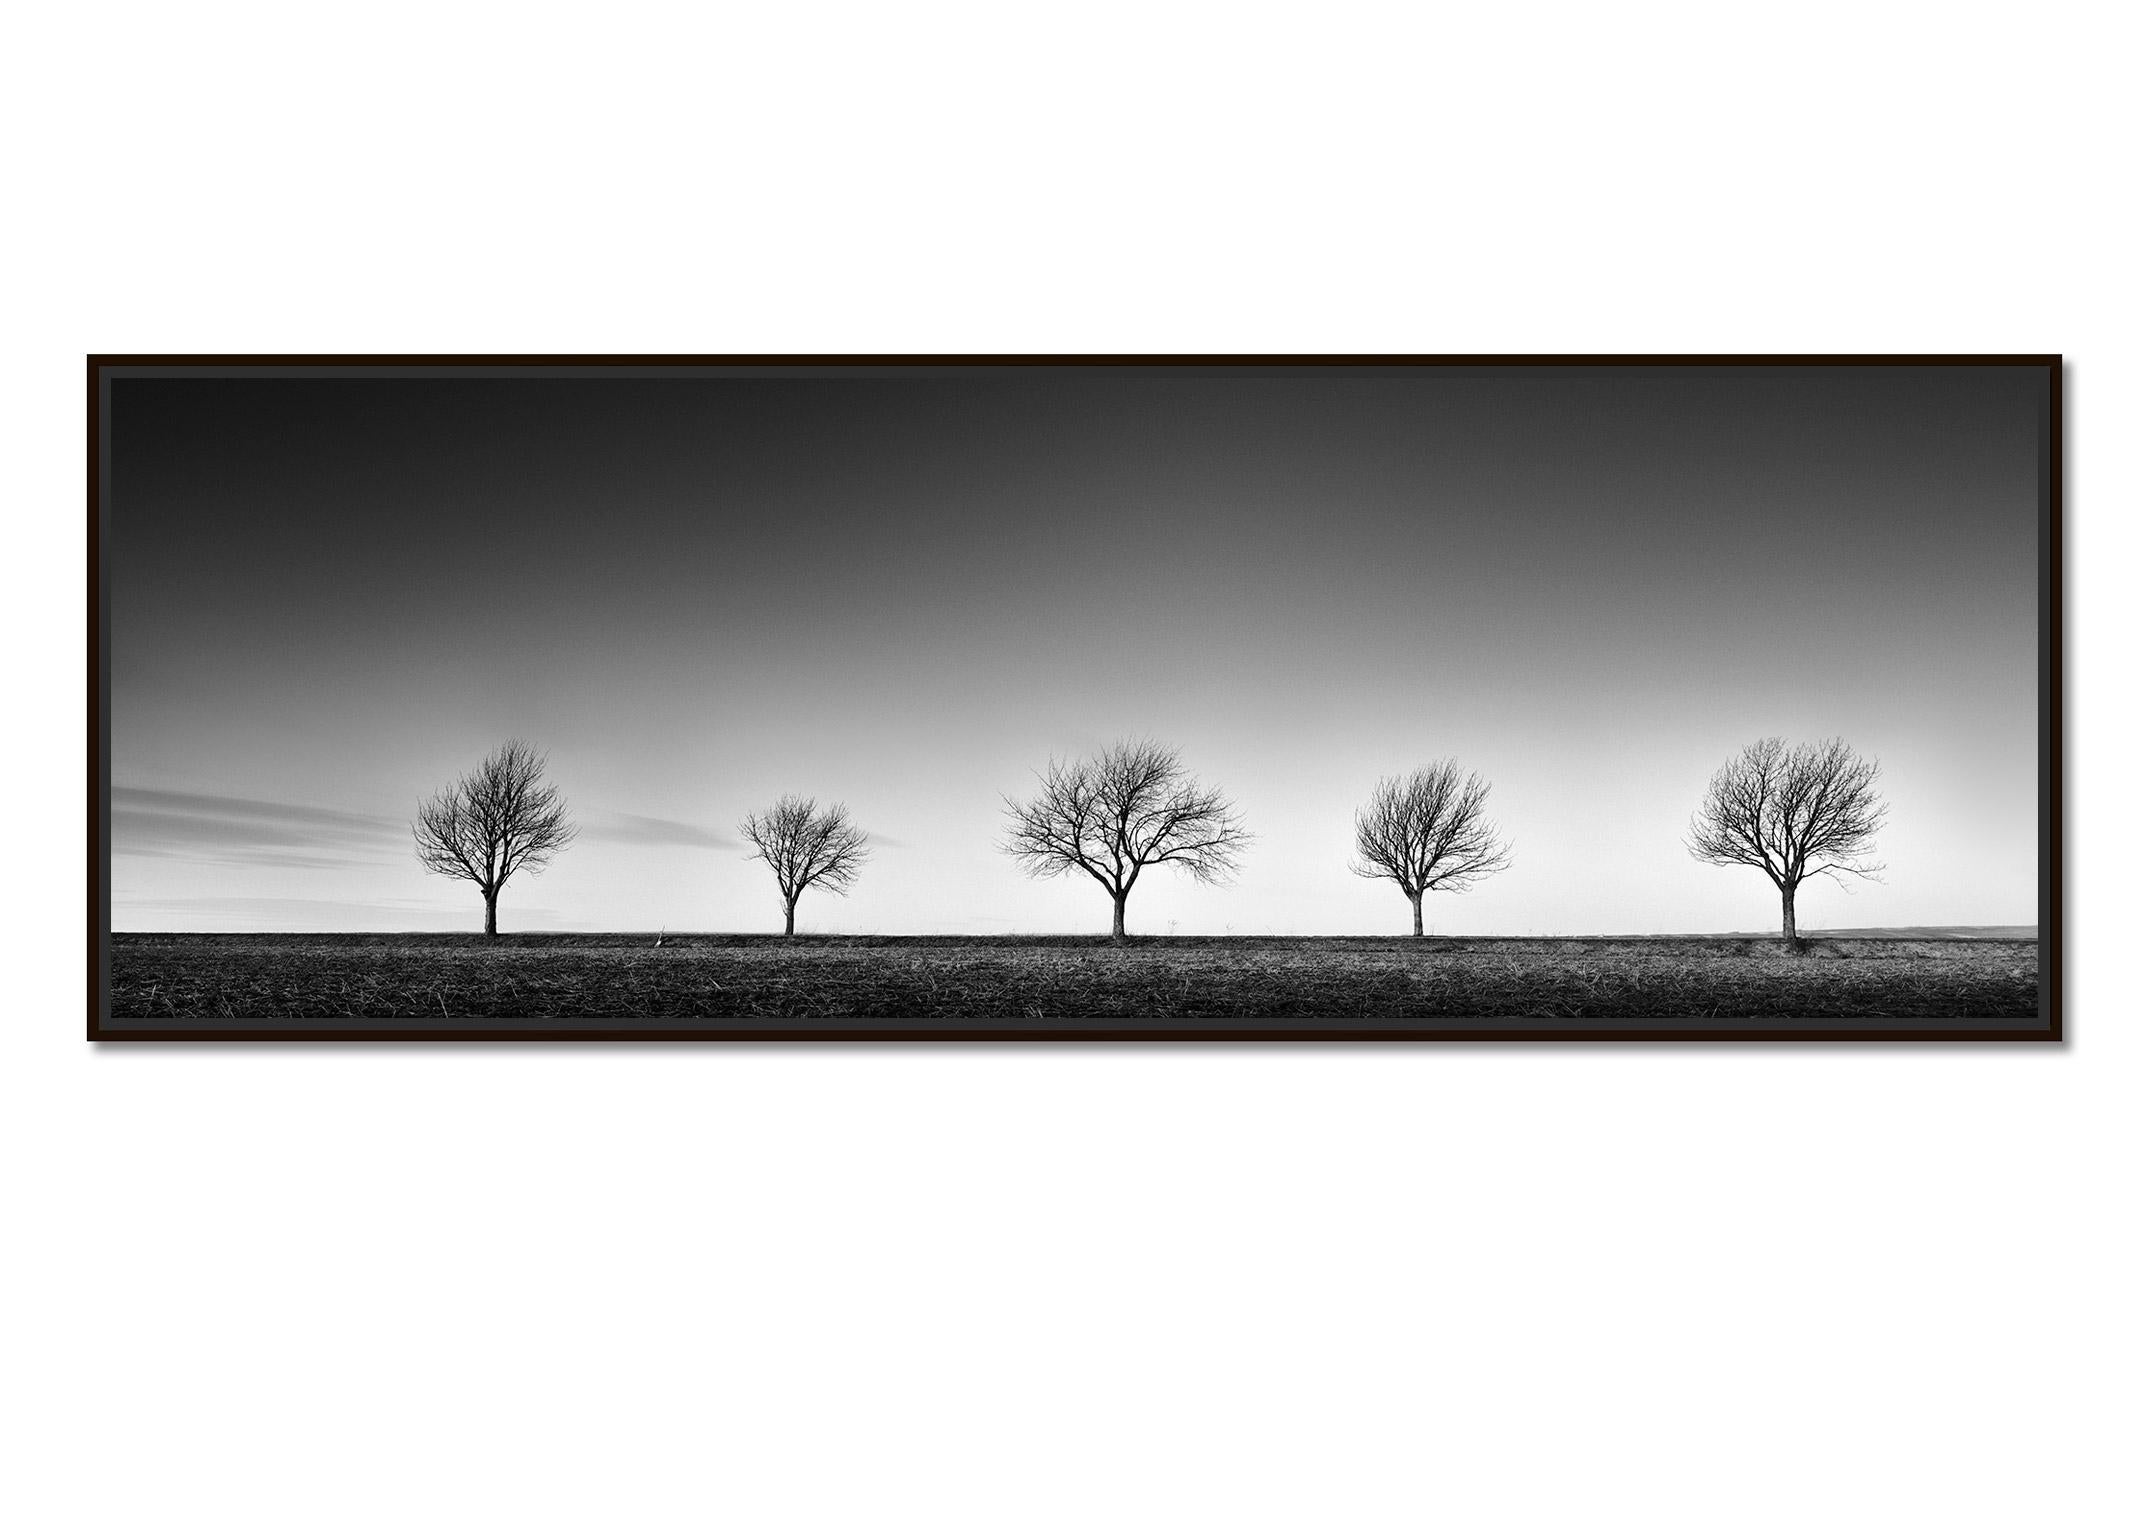 Row of five Trees Austria, panorama black and white art landscape photography - Photograph by Gerald Berghammer